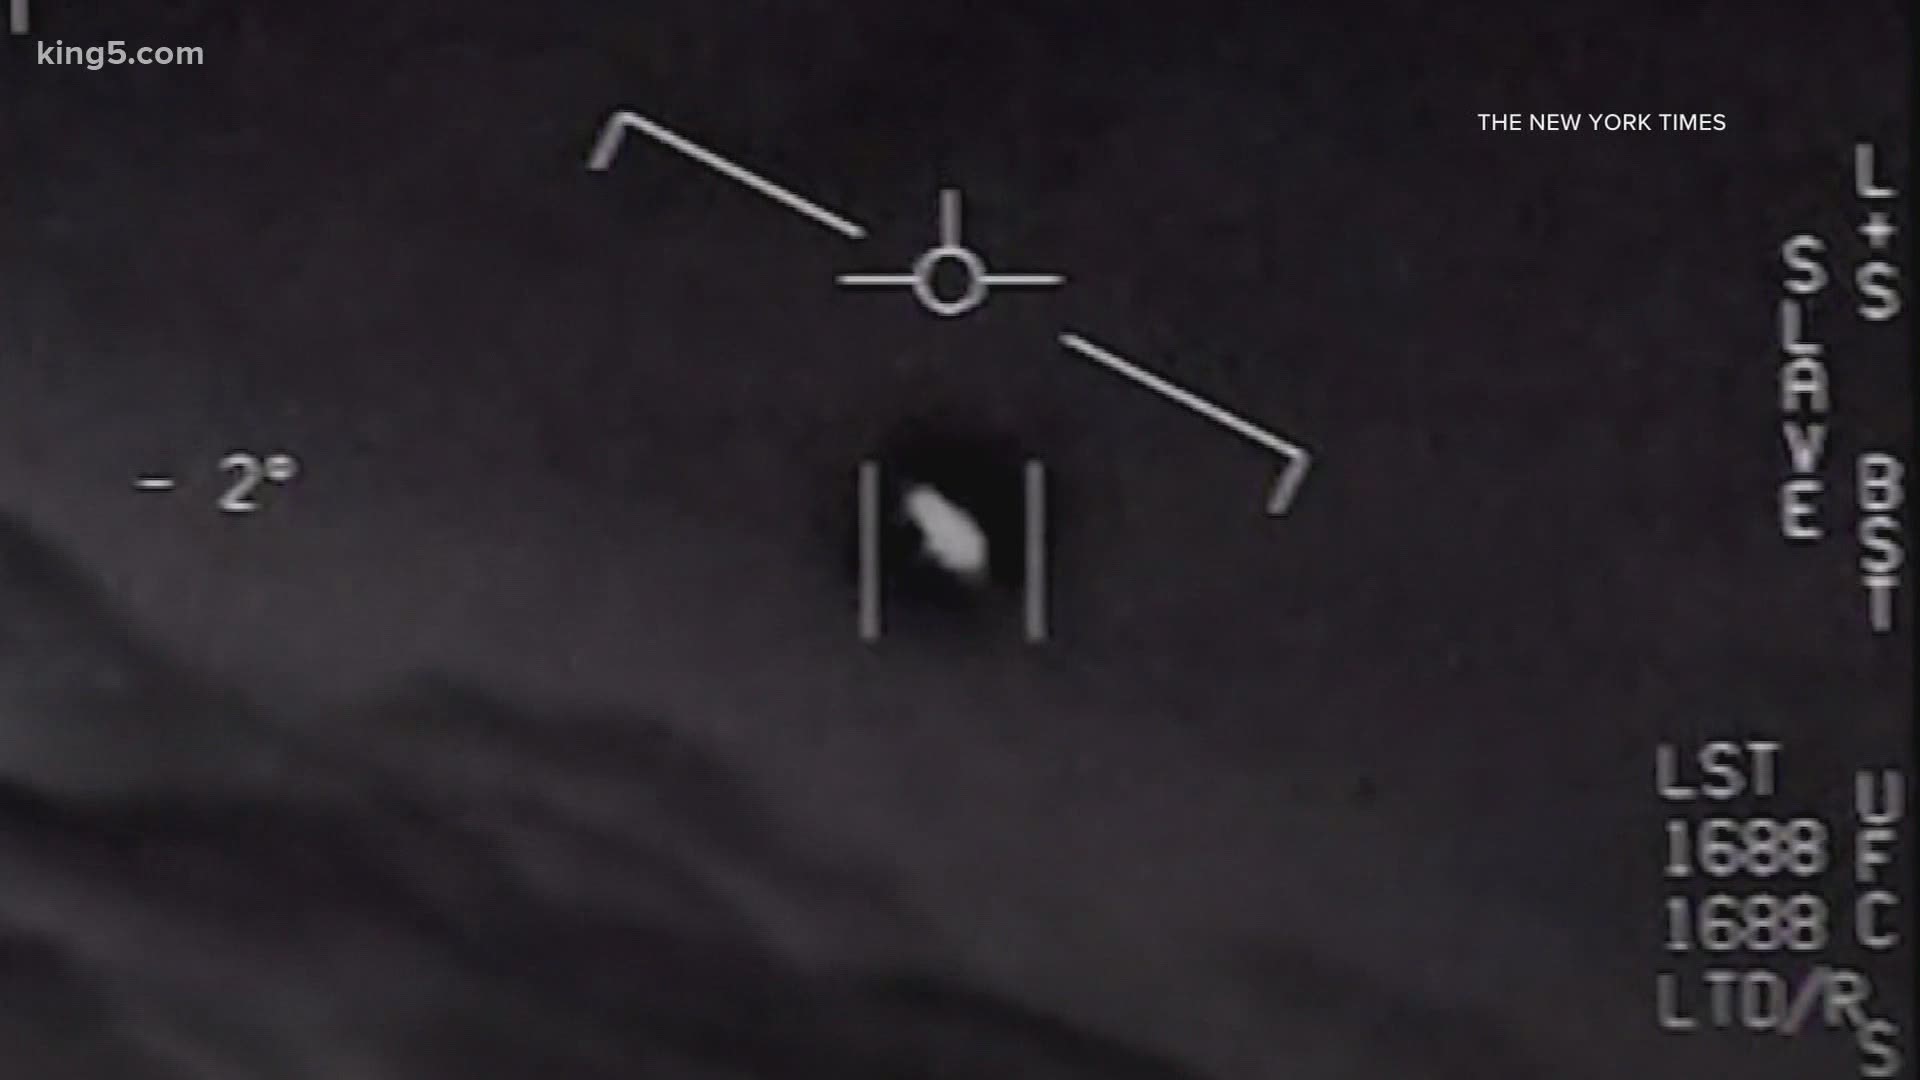 Military officials have released videos that show "unidentified flying objects," or UFO's to clear up speculation they were fake.